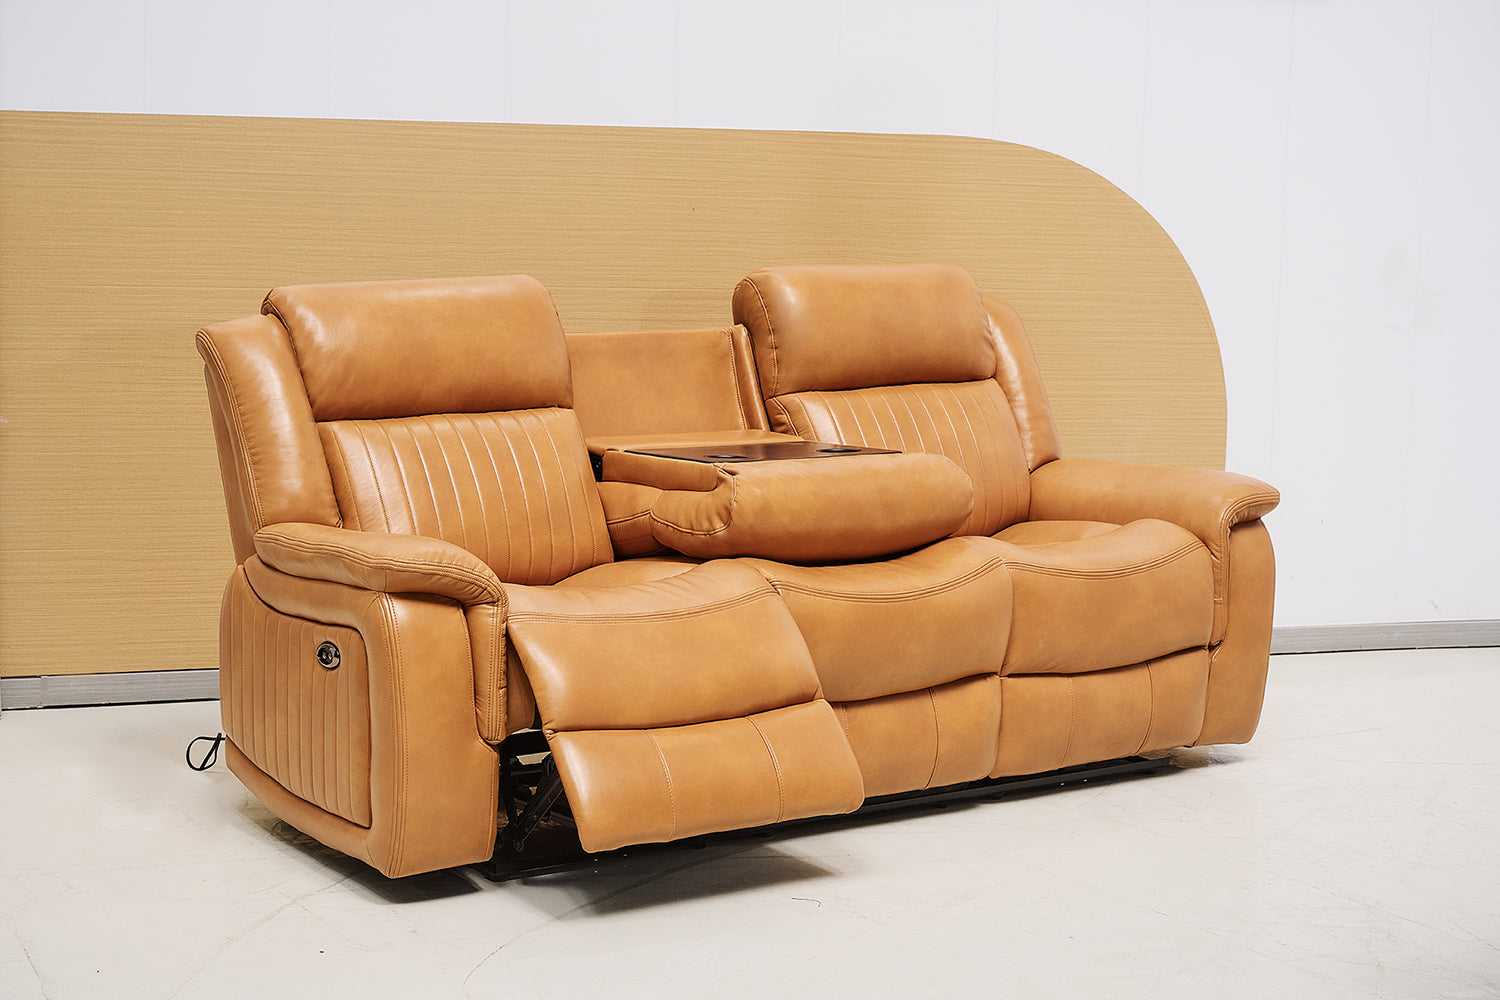 BT Paragon PU Leather Upholstered  3 Seater Electric Recliner Lounge